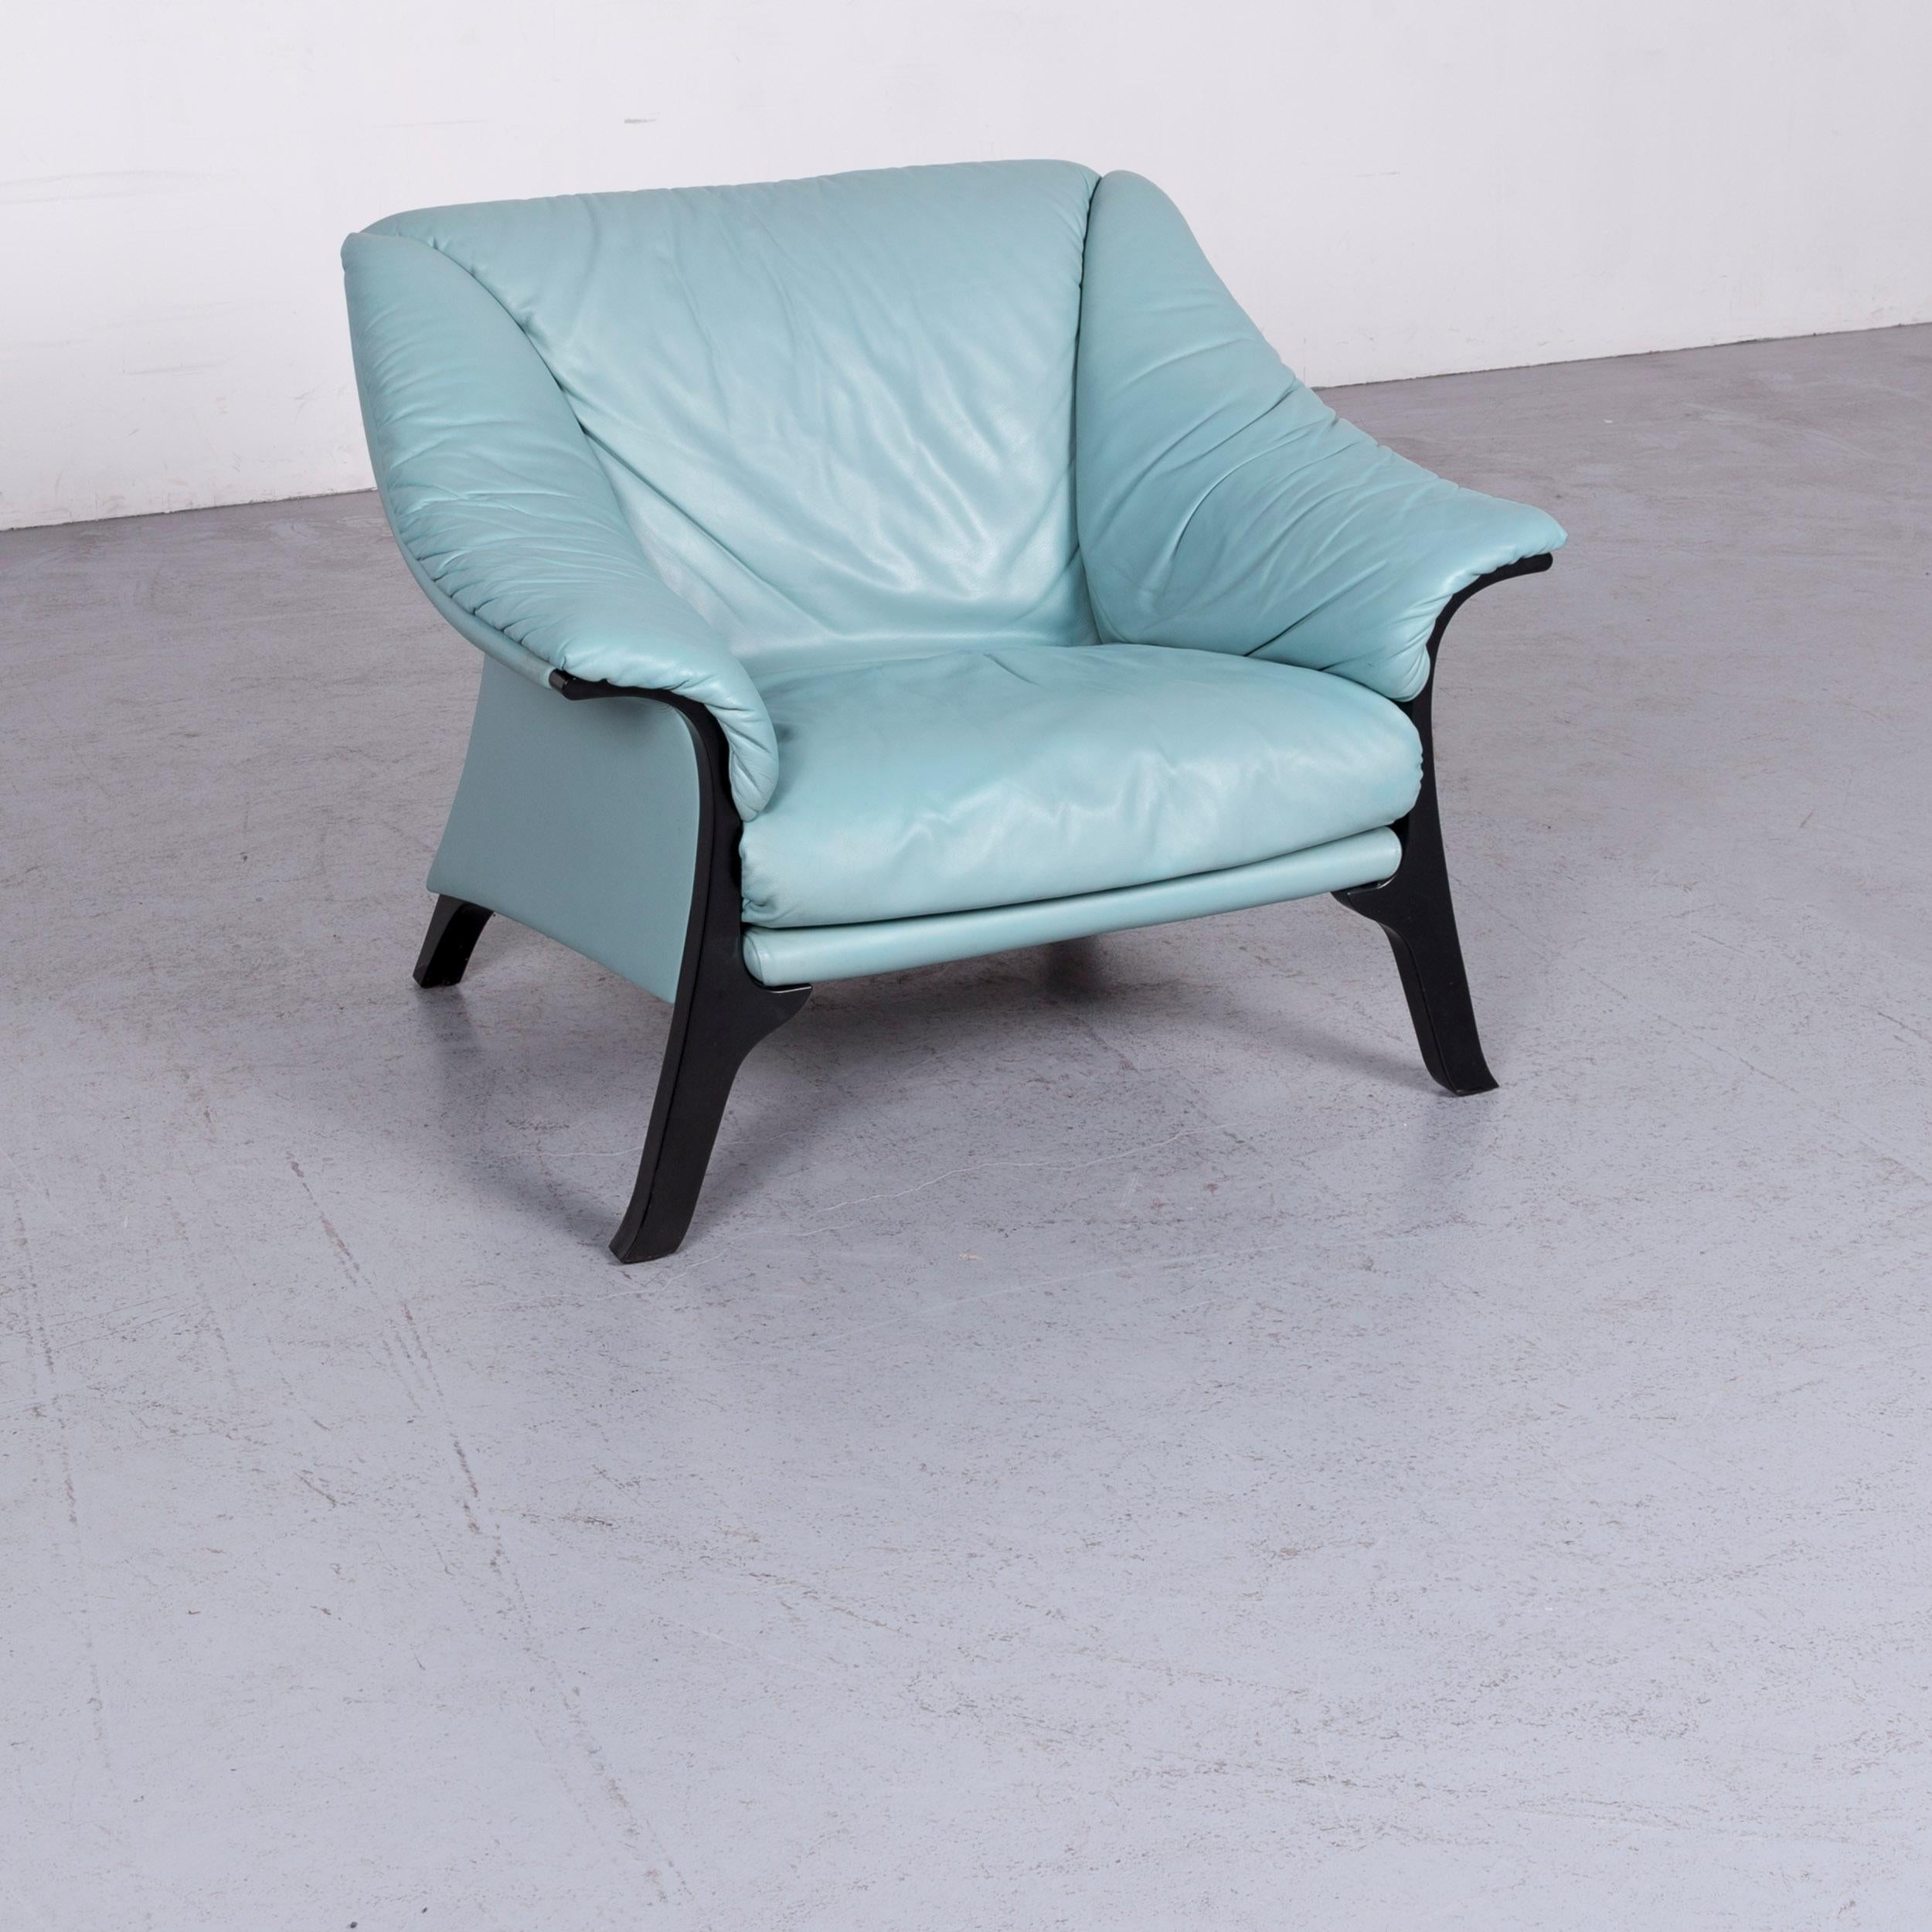 We bring to you a Poltrona Frau designer leather armchair blue one-seat chair.